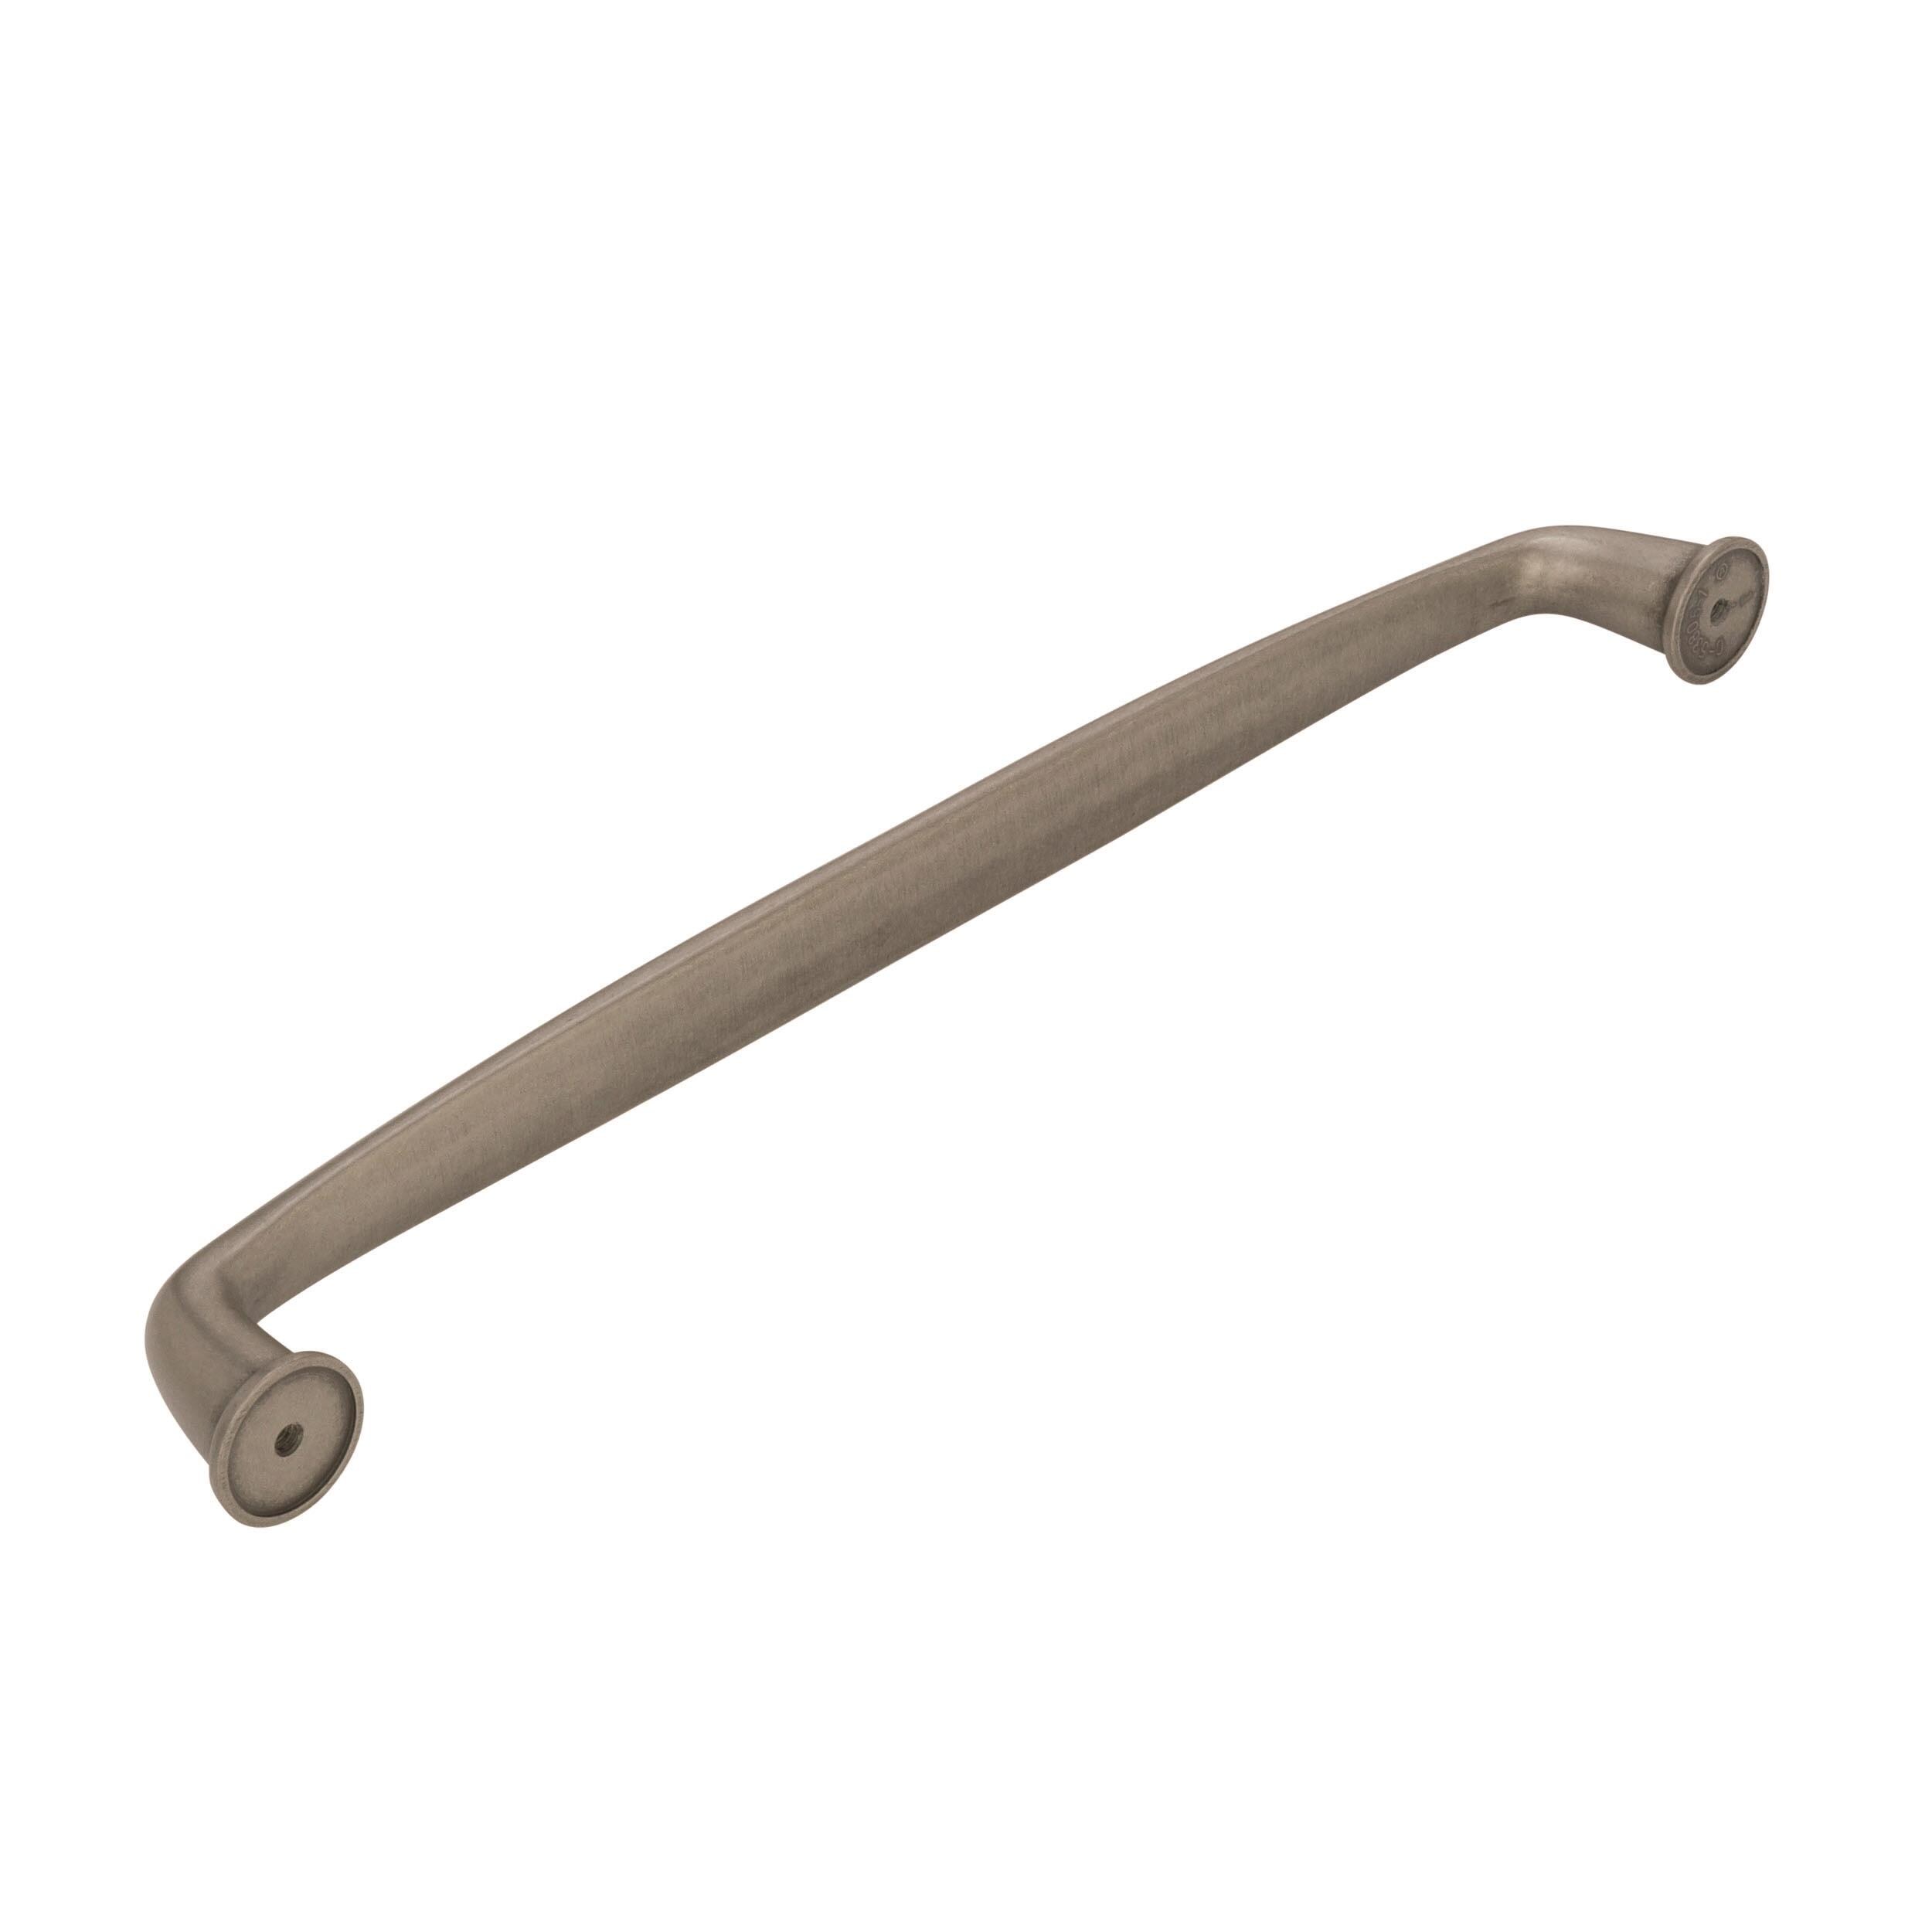 Amerock Kane 12-in Center to Center Weathered Nickel Arch Appliance For Use on Appliances Drawer Pulls